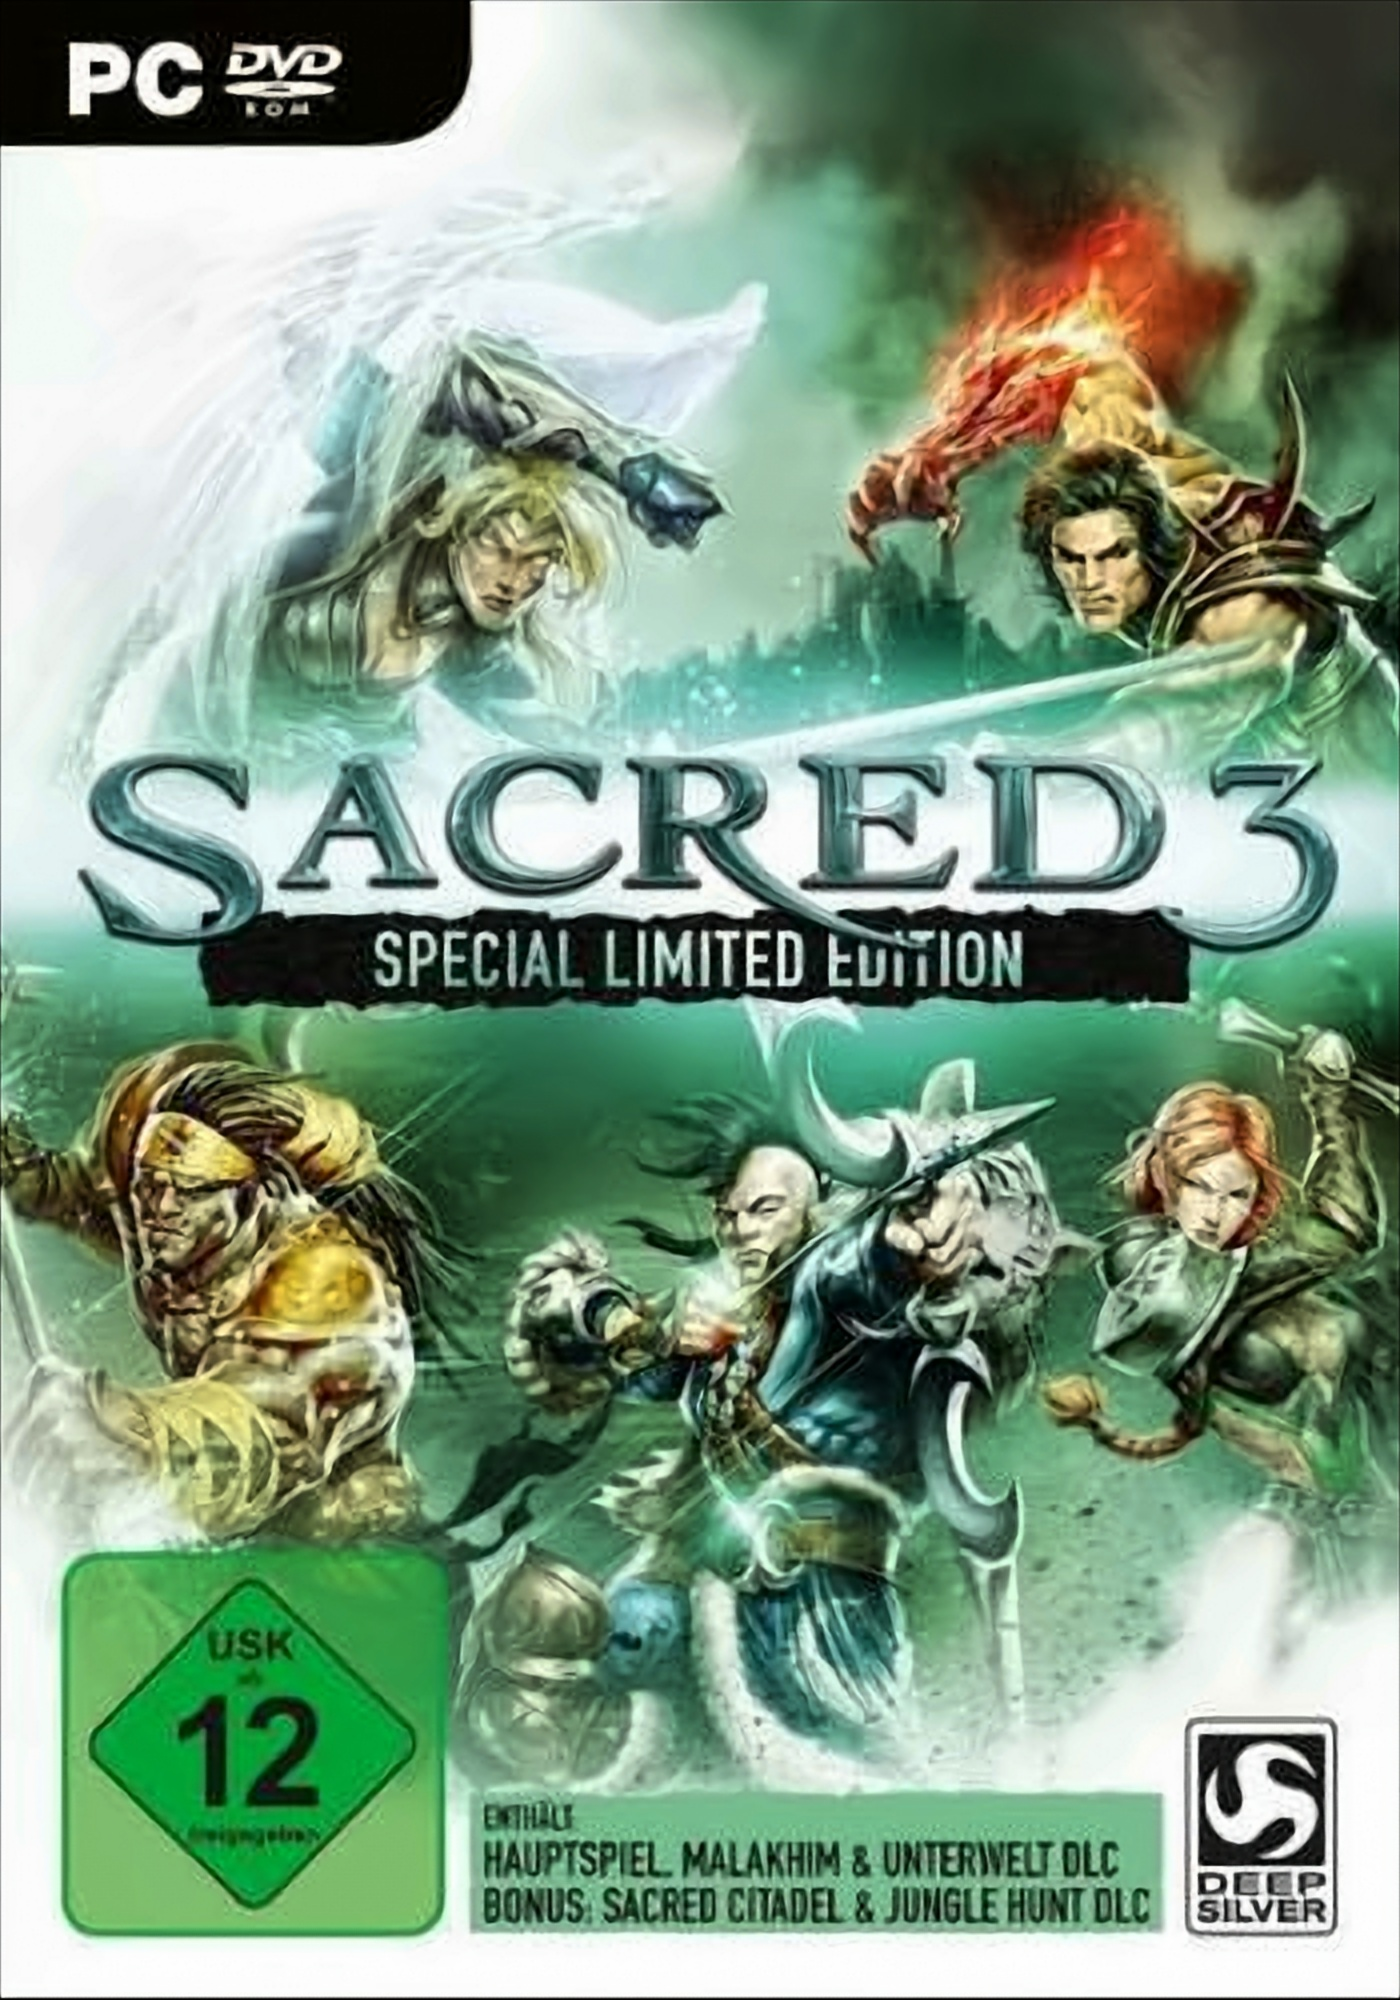 Special Edition - Limited - 3 Sacred [PC]